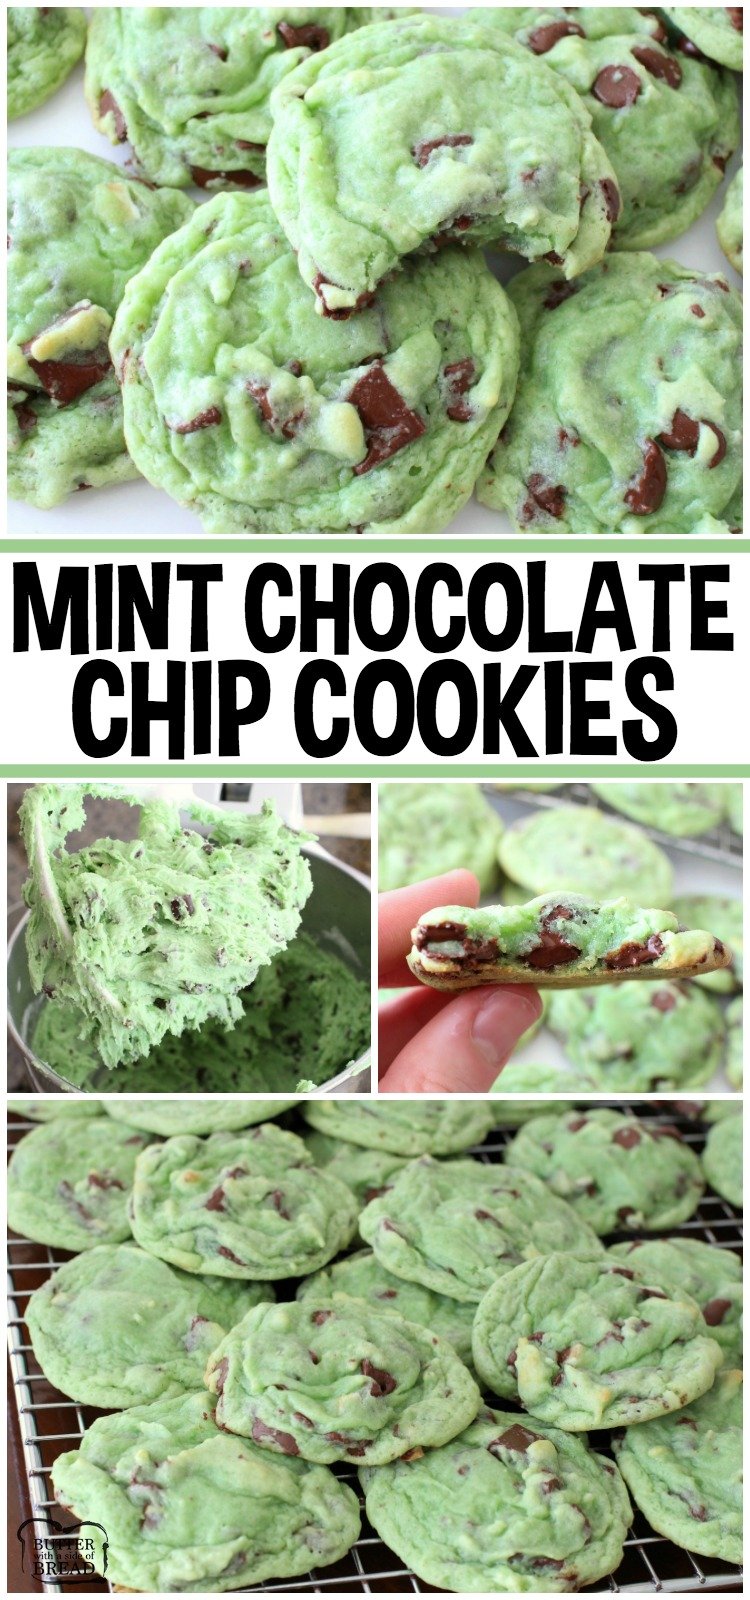 Easy, soft with a perfect blend of mint & chocolate, these Mint Chocolate Pudding Cookies are amazing! Recipe from Butter With A Side of Bread